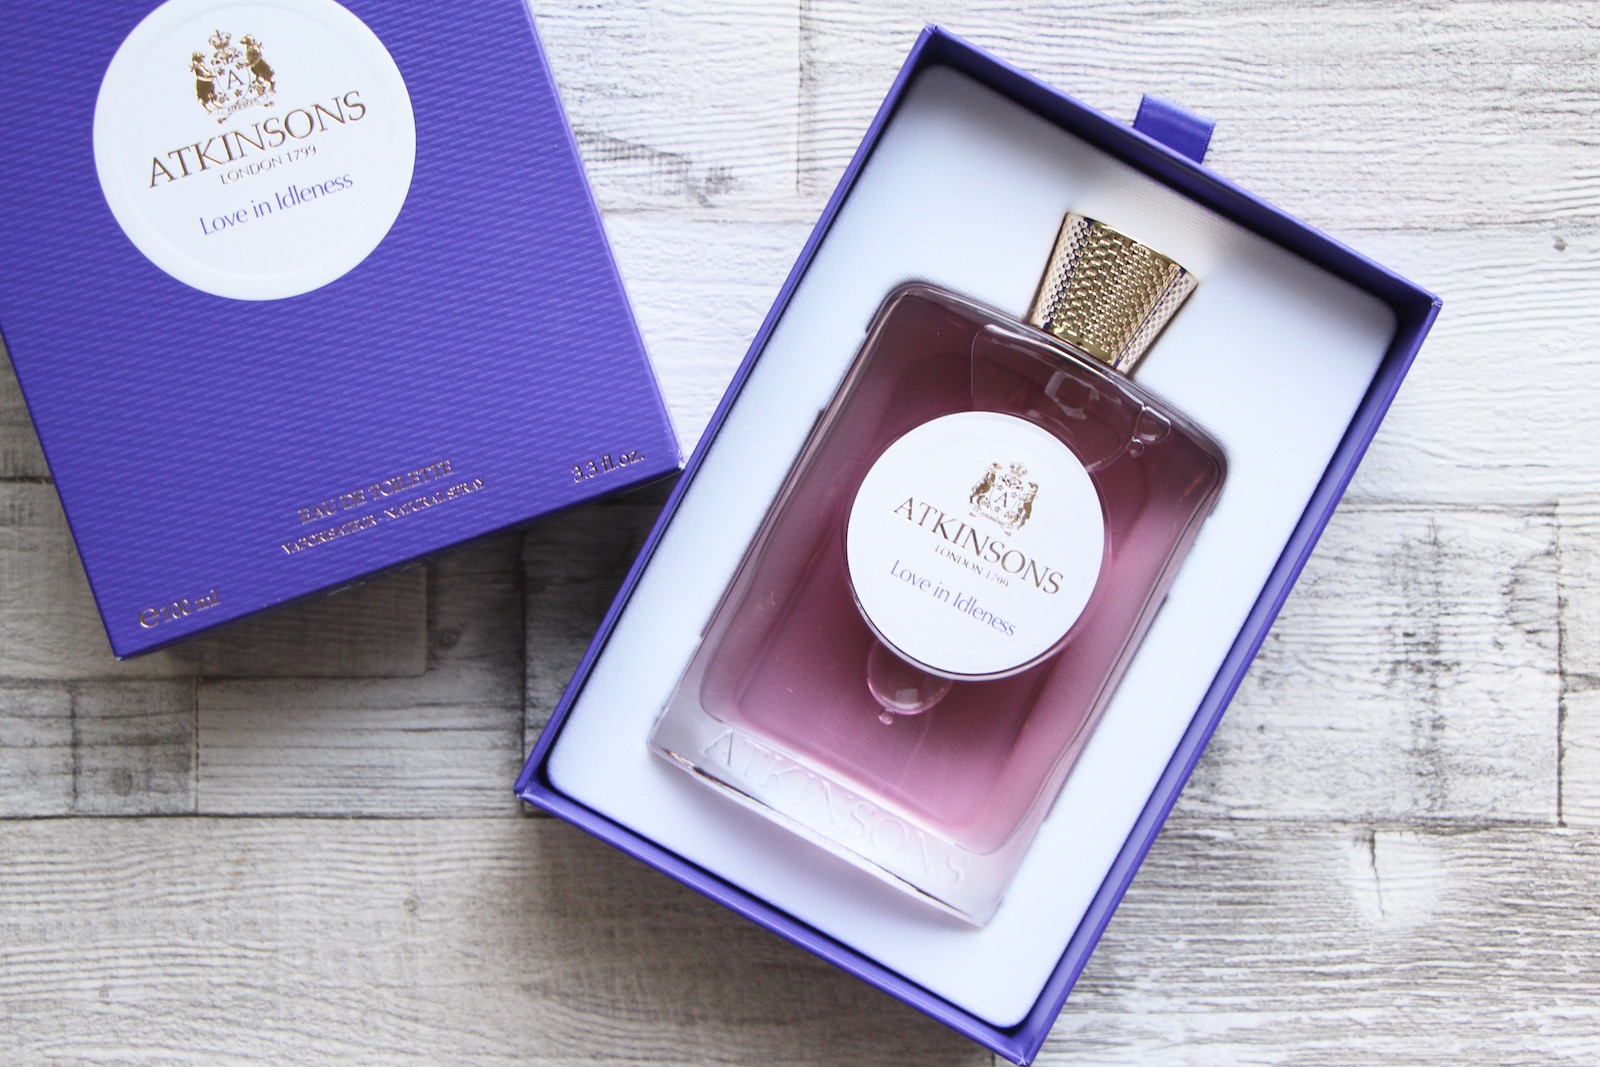 Atkinsons Love In Idleness Fragrance Review